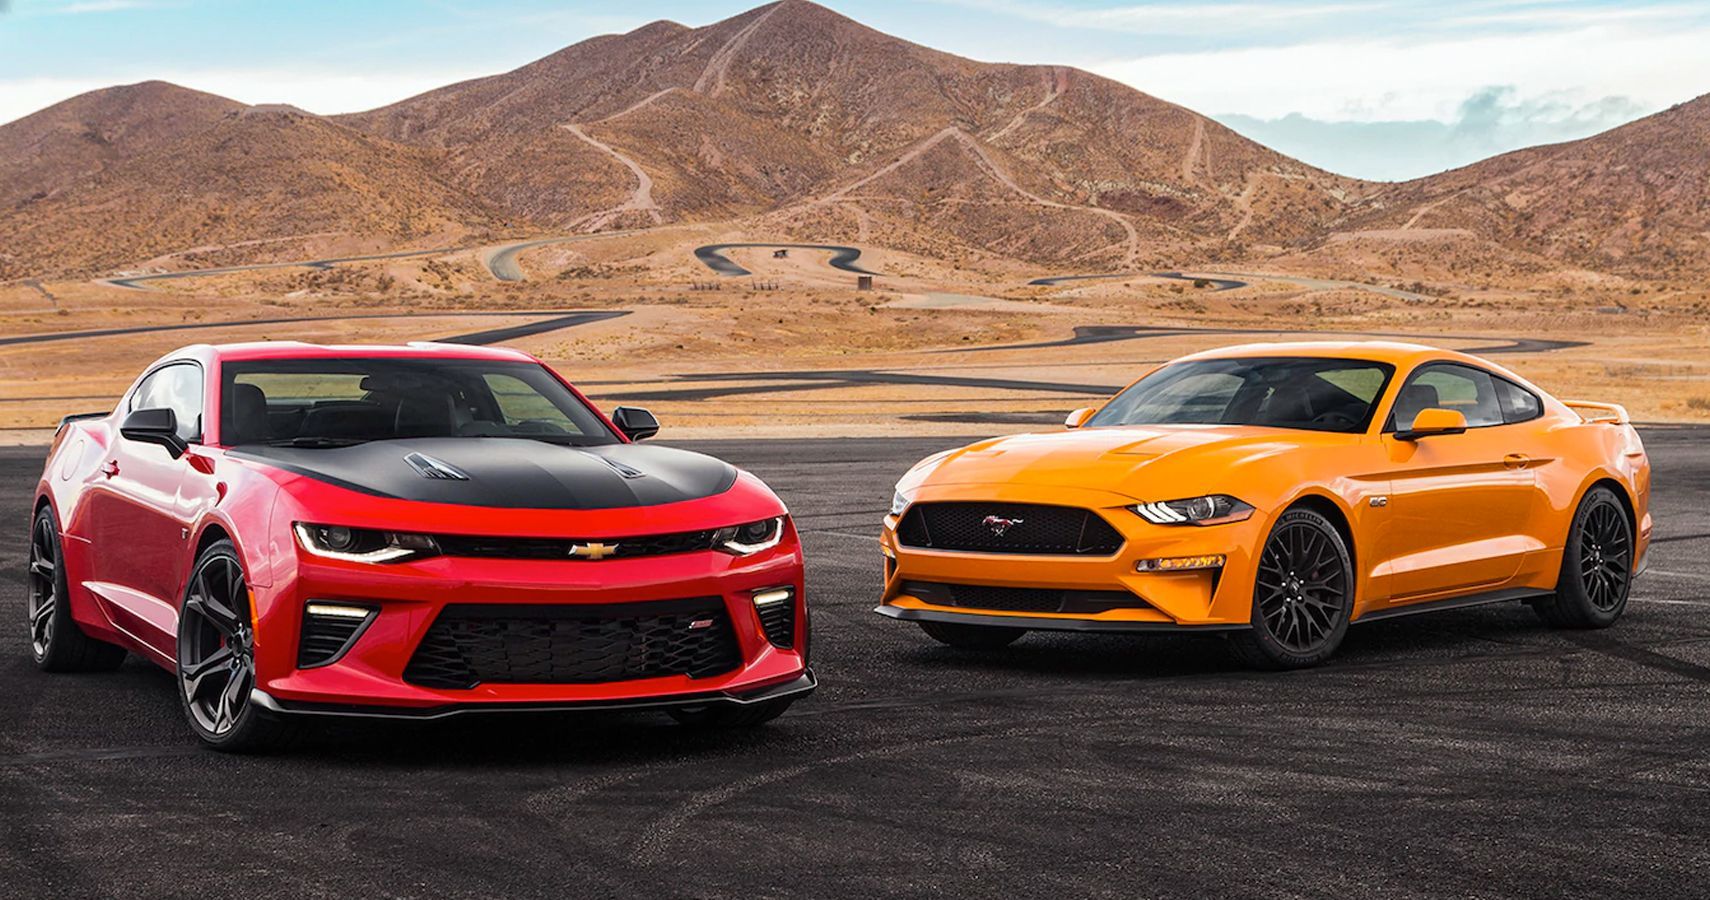 Ford Mustang vs Chevy Camaro Which Car Is Right For You?